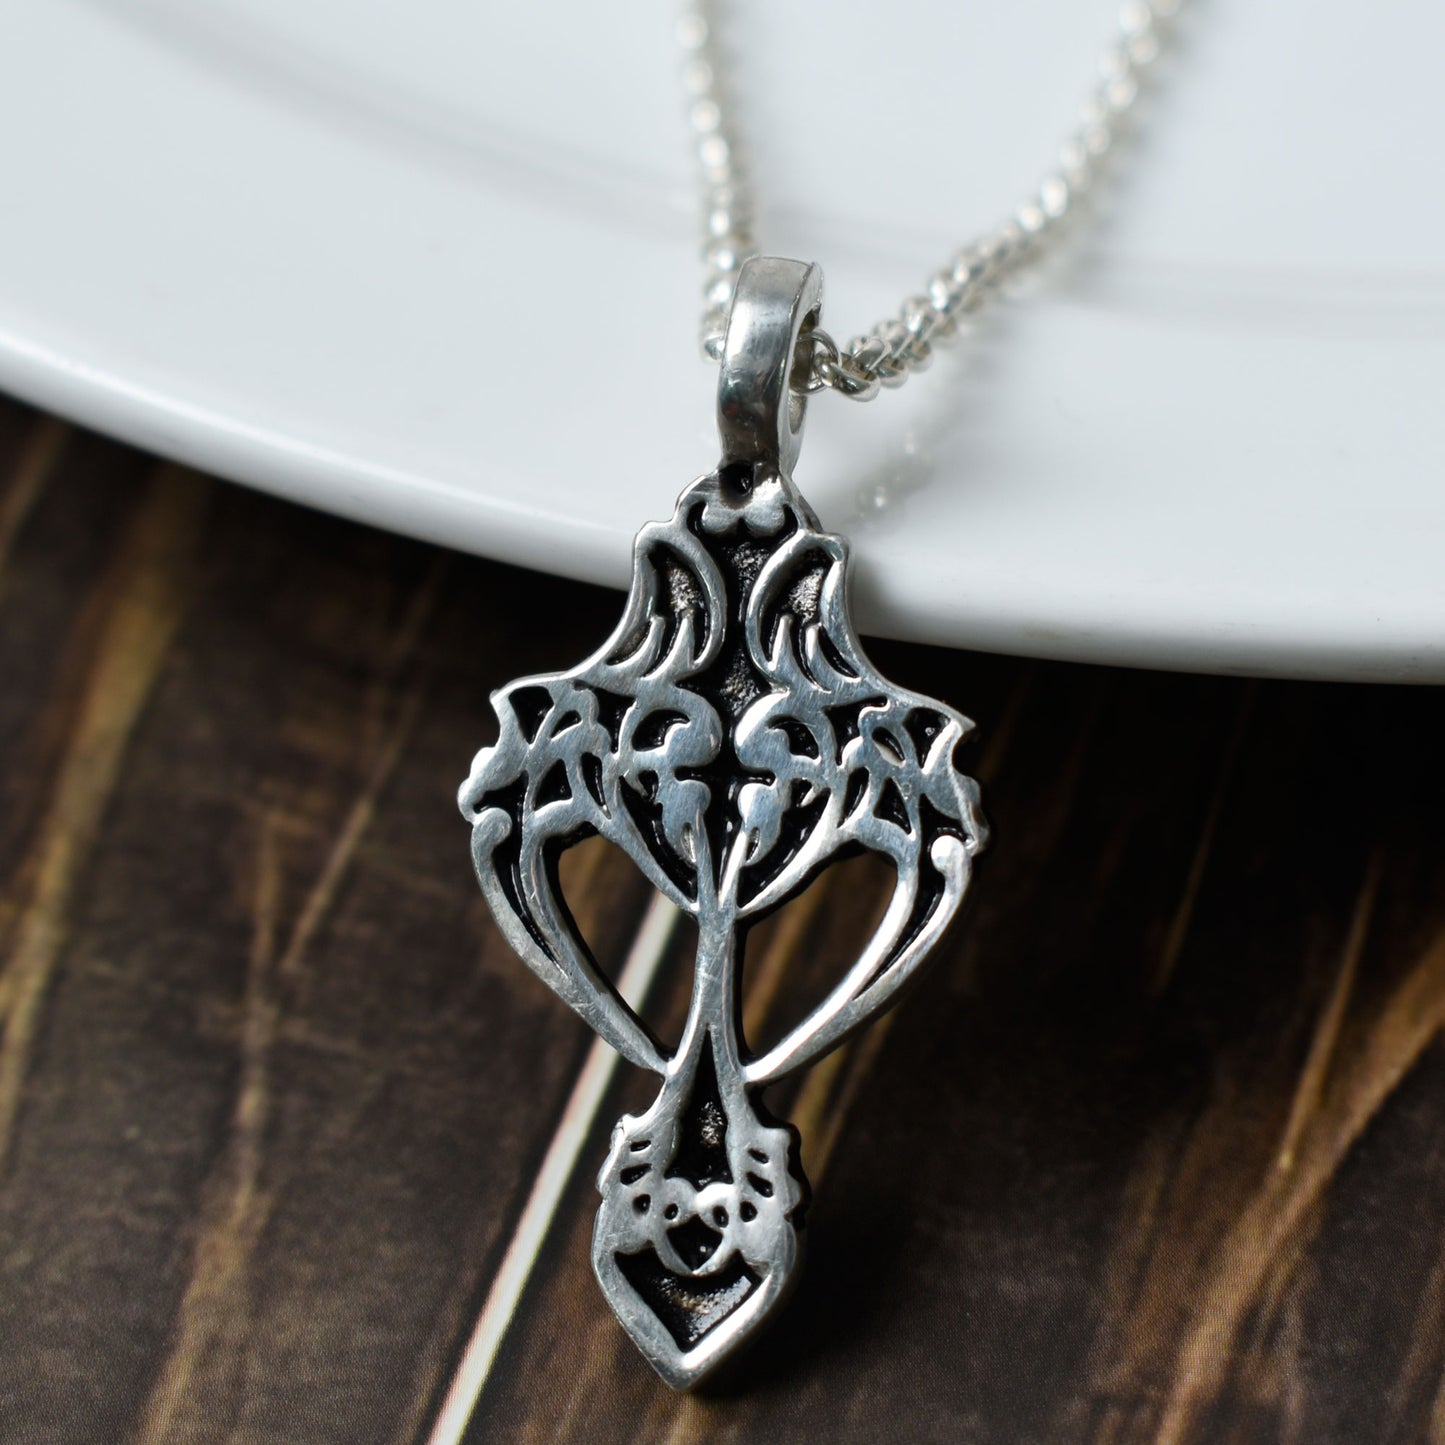 New Gothic Cross Silver Pewter Charm Necklace Pendant Jewelry